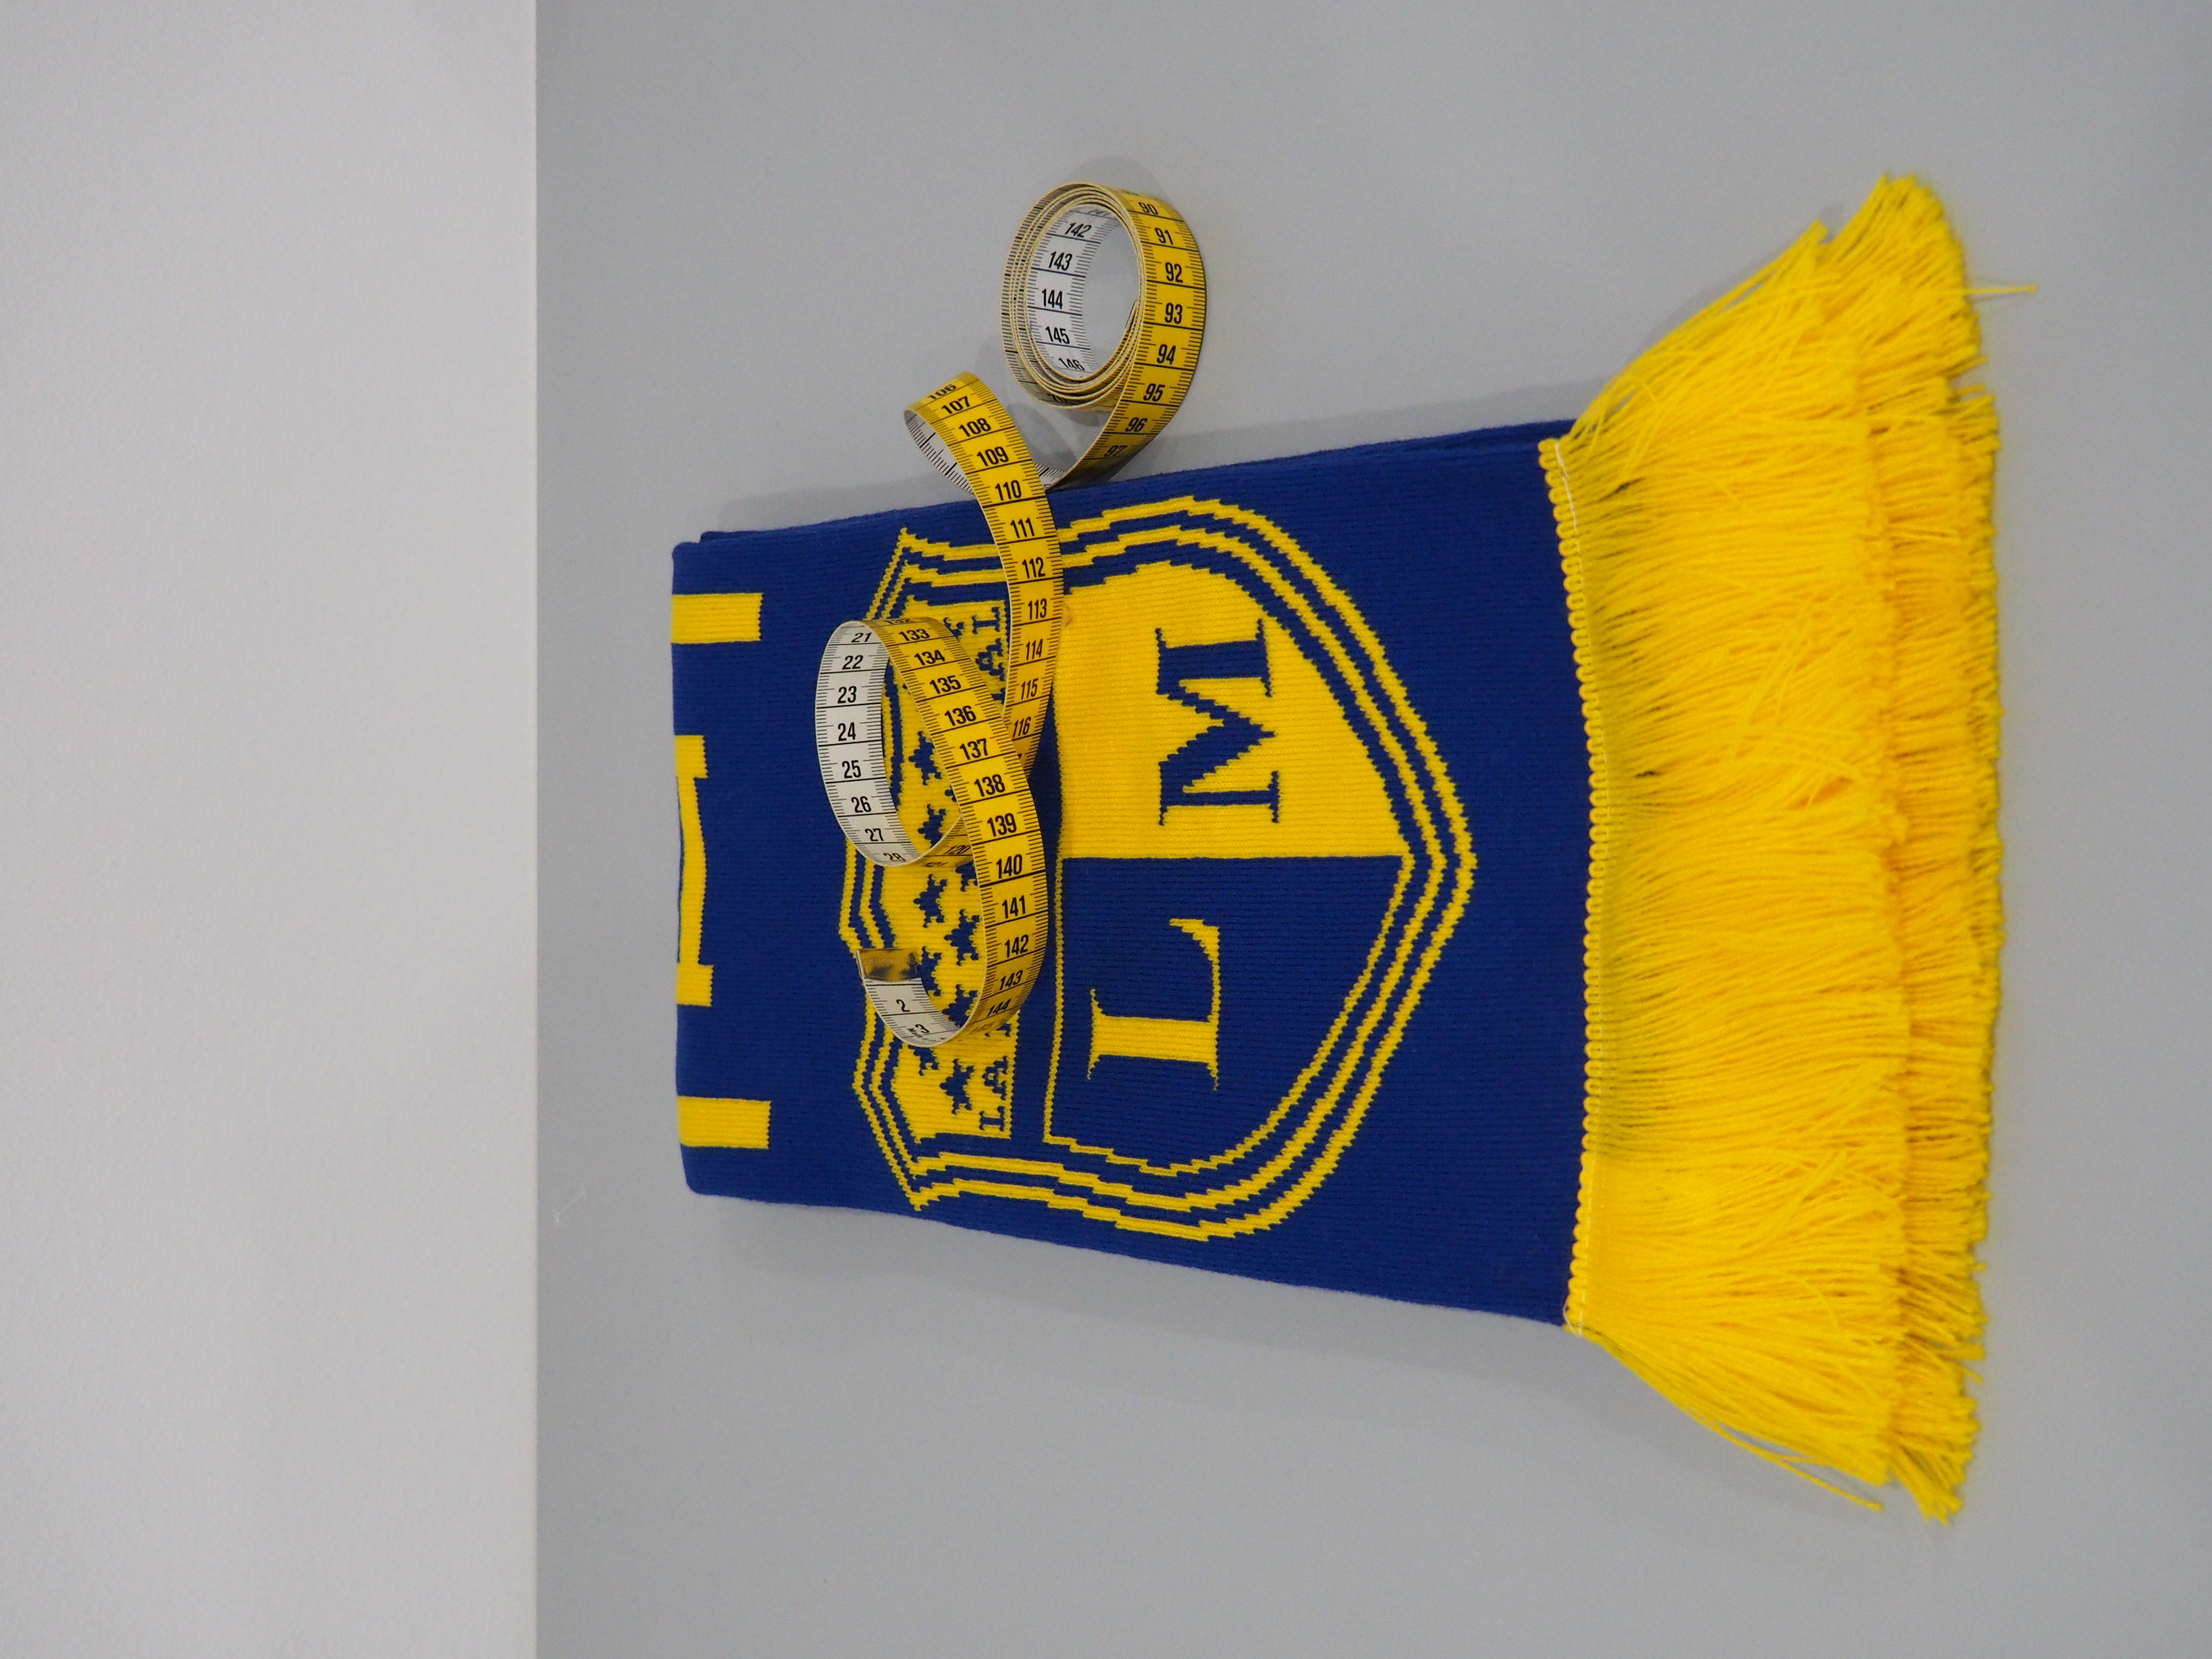 How long are soccer scarves?